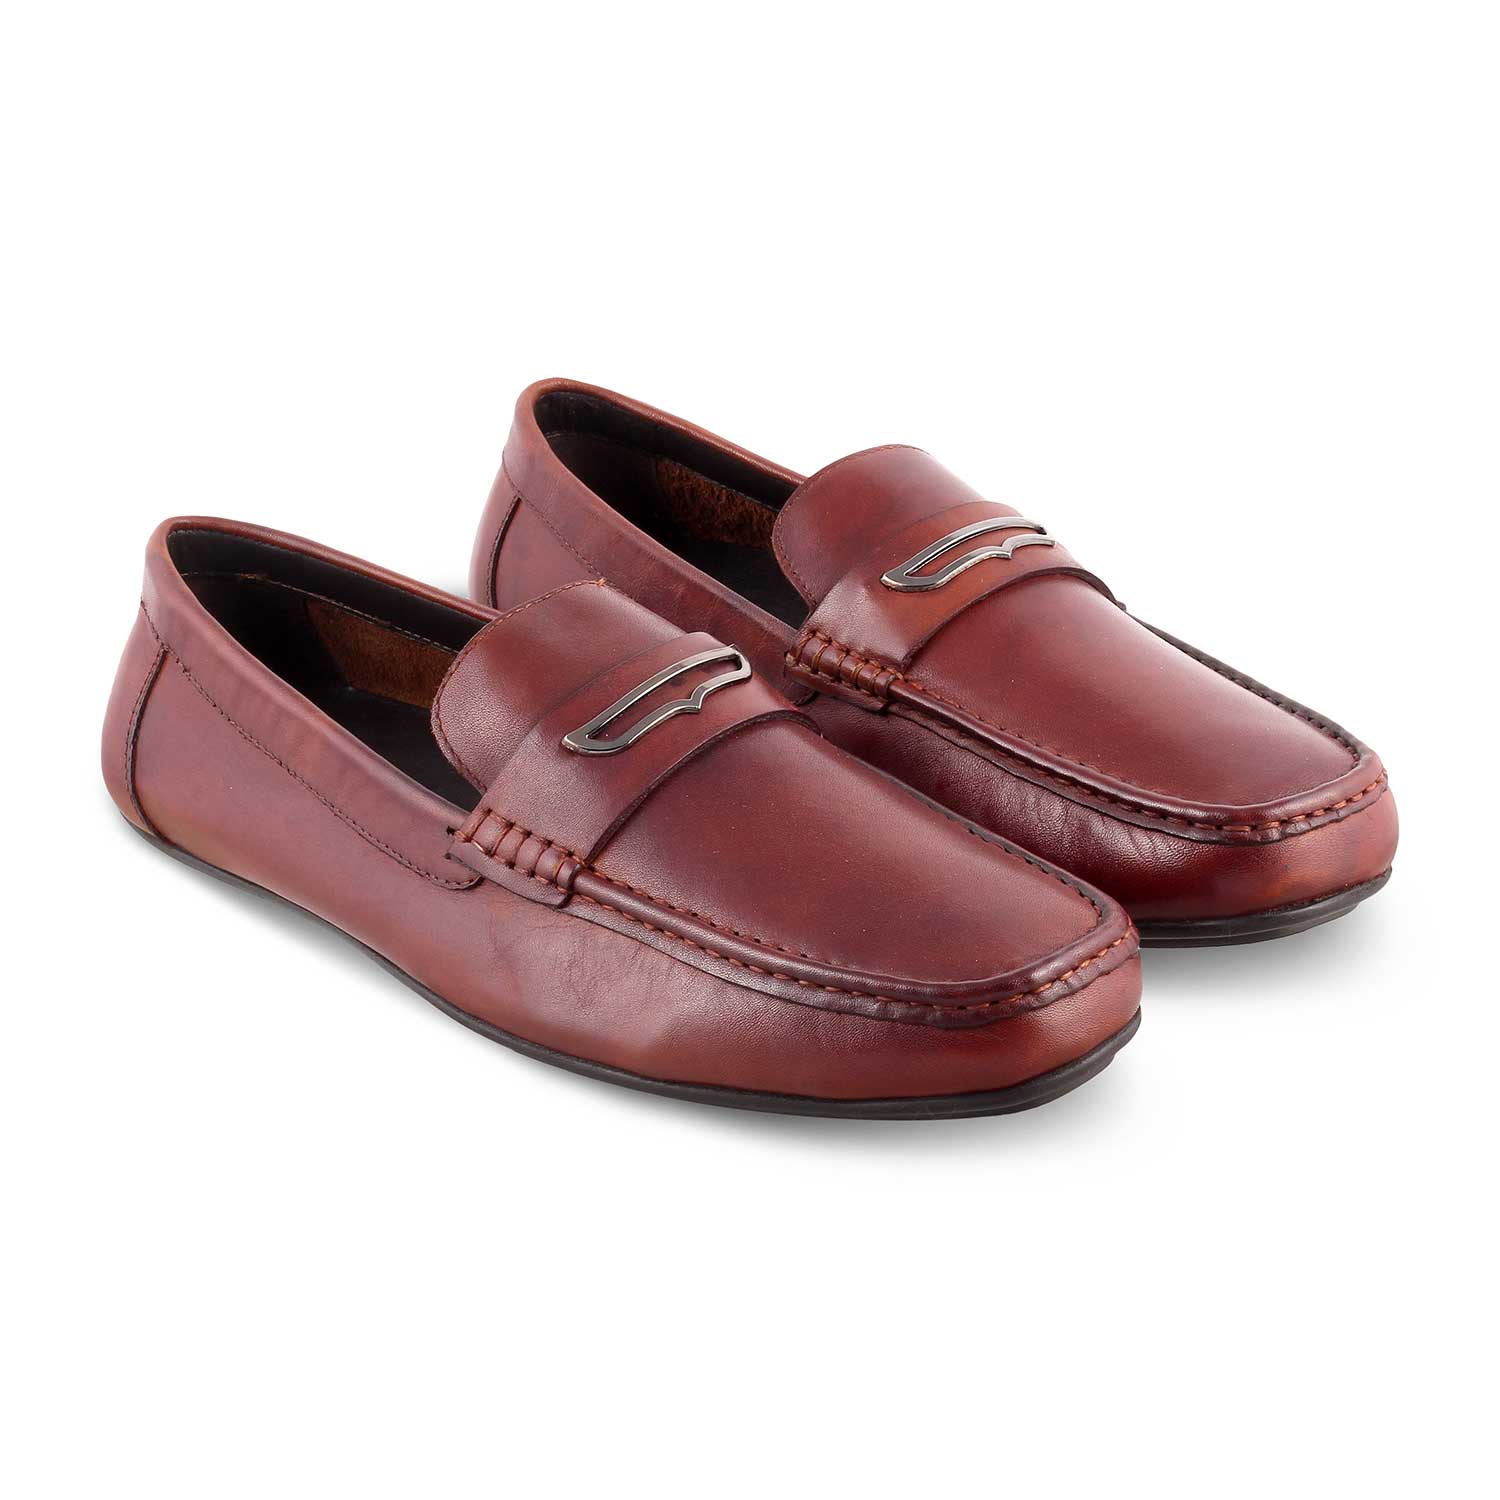 Tresmode-The Yodry Tan Men's Leather Driving Loafers Tresmode-Tresmode